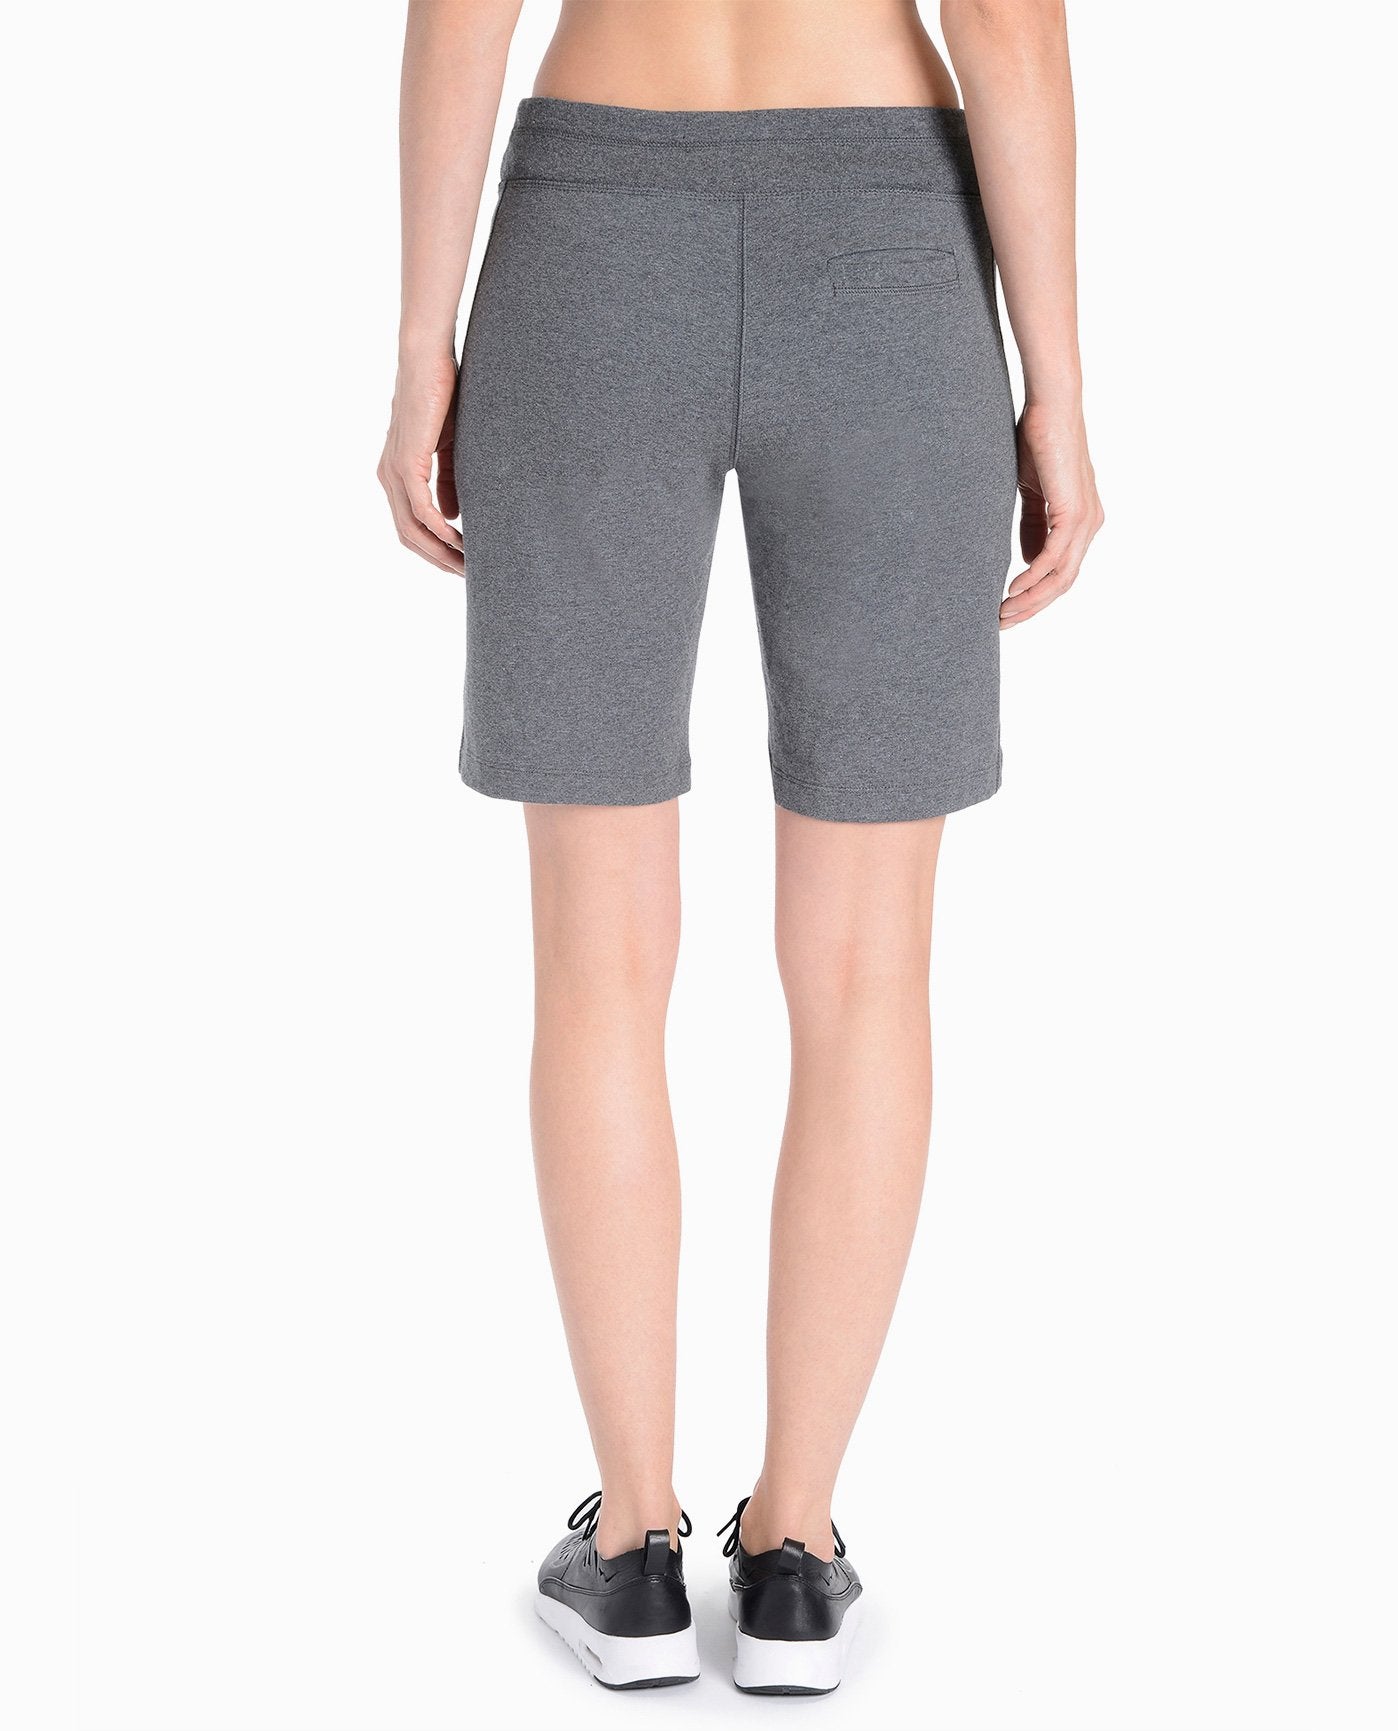 Danskin NOW Semi-Fitted Charcoal Gray Athletic Shorts